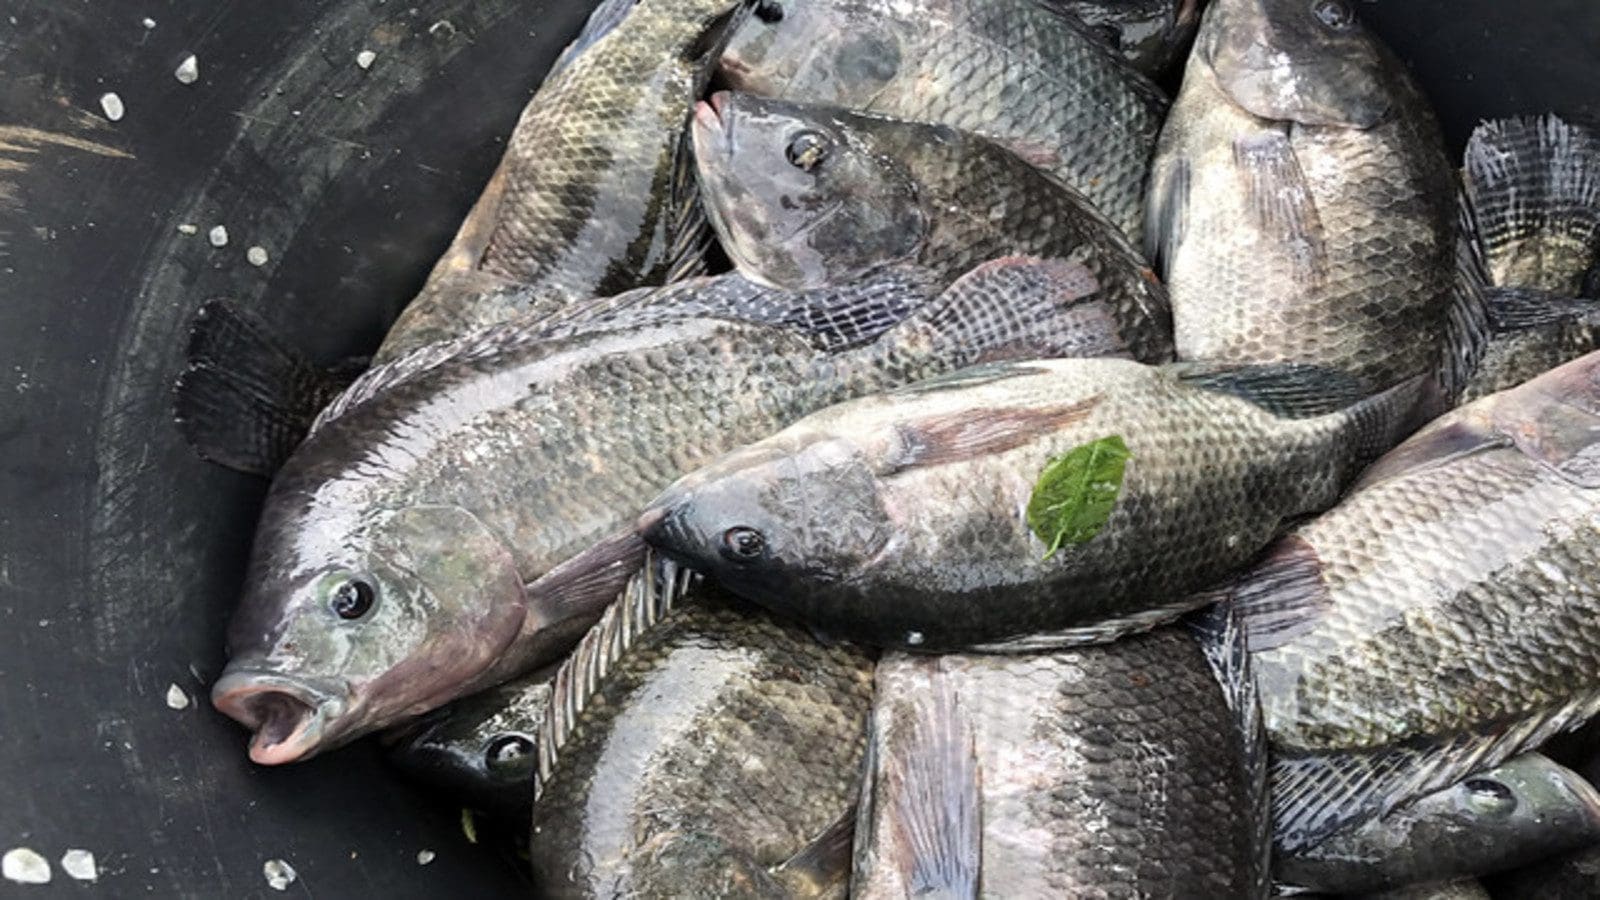 Ghana’s Fisheries Commission revamps Fish Farming Certification Protocol